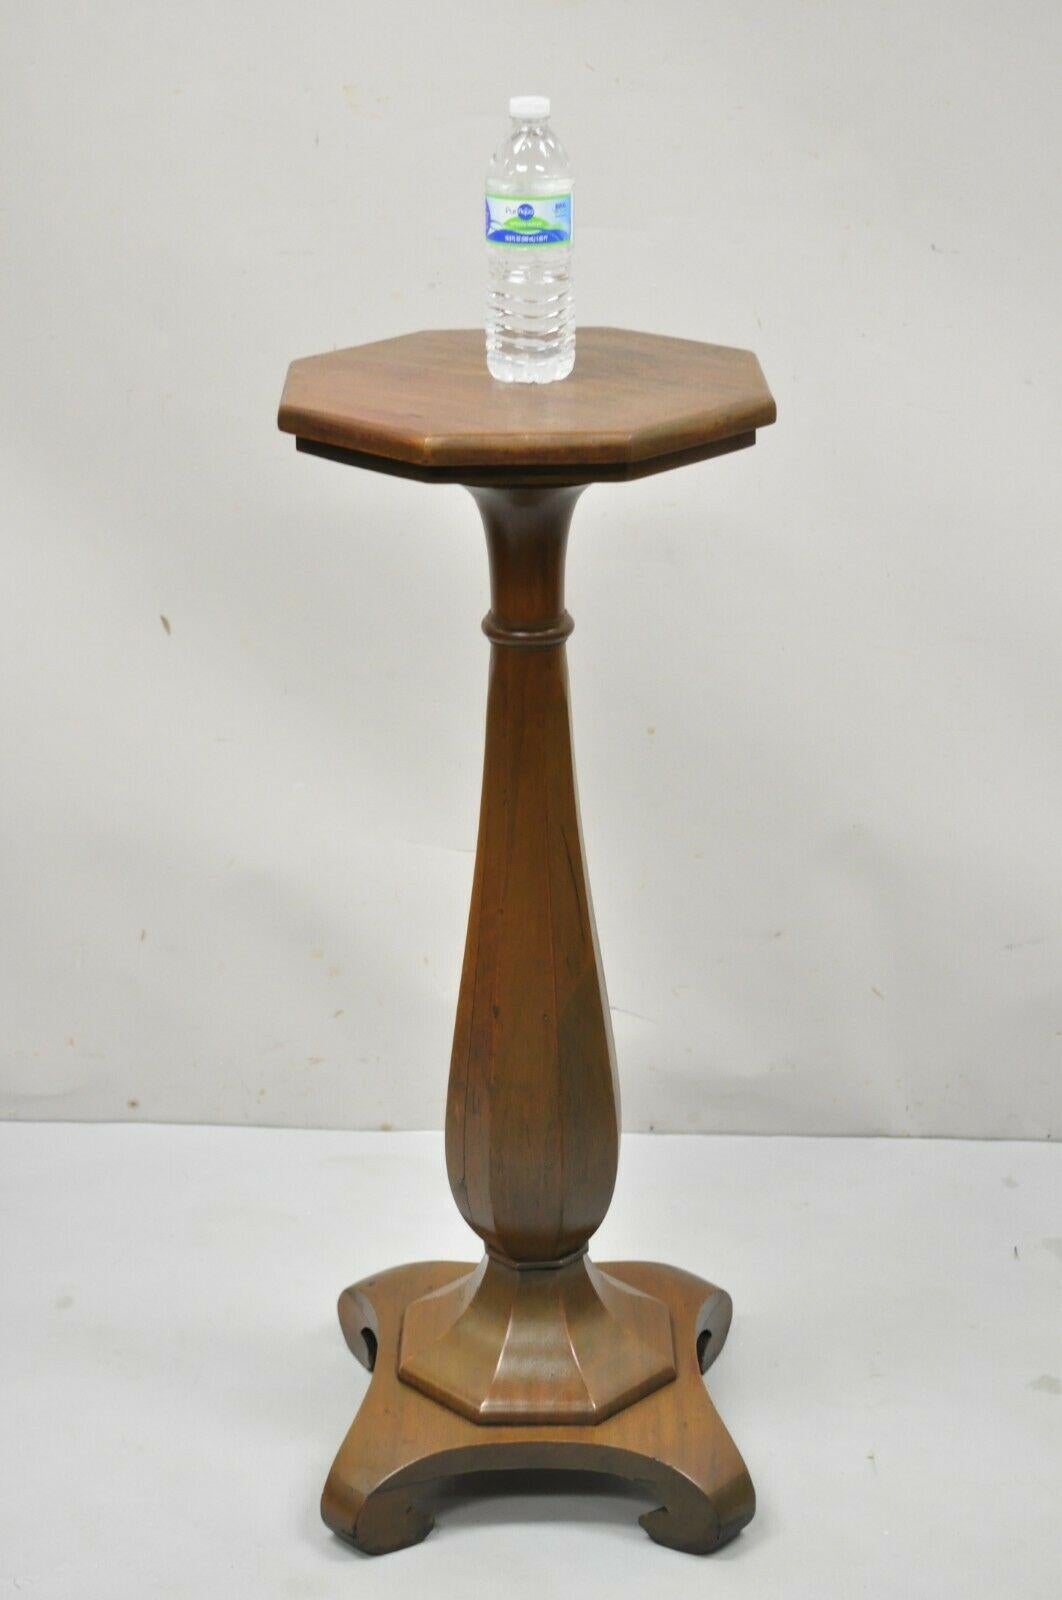 Antique American Empire Carved Mahogany Octagonal Top Pedestal Column Plant Stand. Item features an octagonal top, shapely carved central column, solid wood construction, beautiful wood grain, nicely carved details, very nice antique item, quality